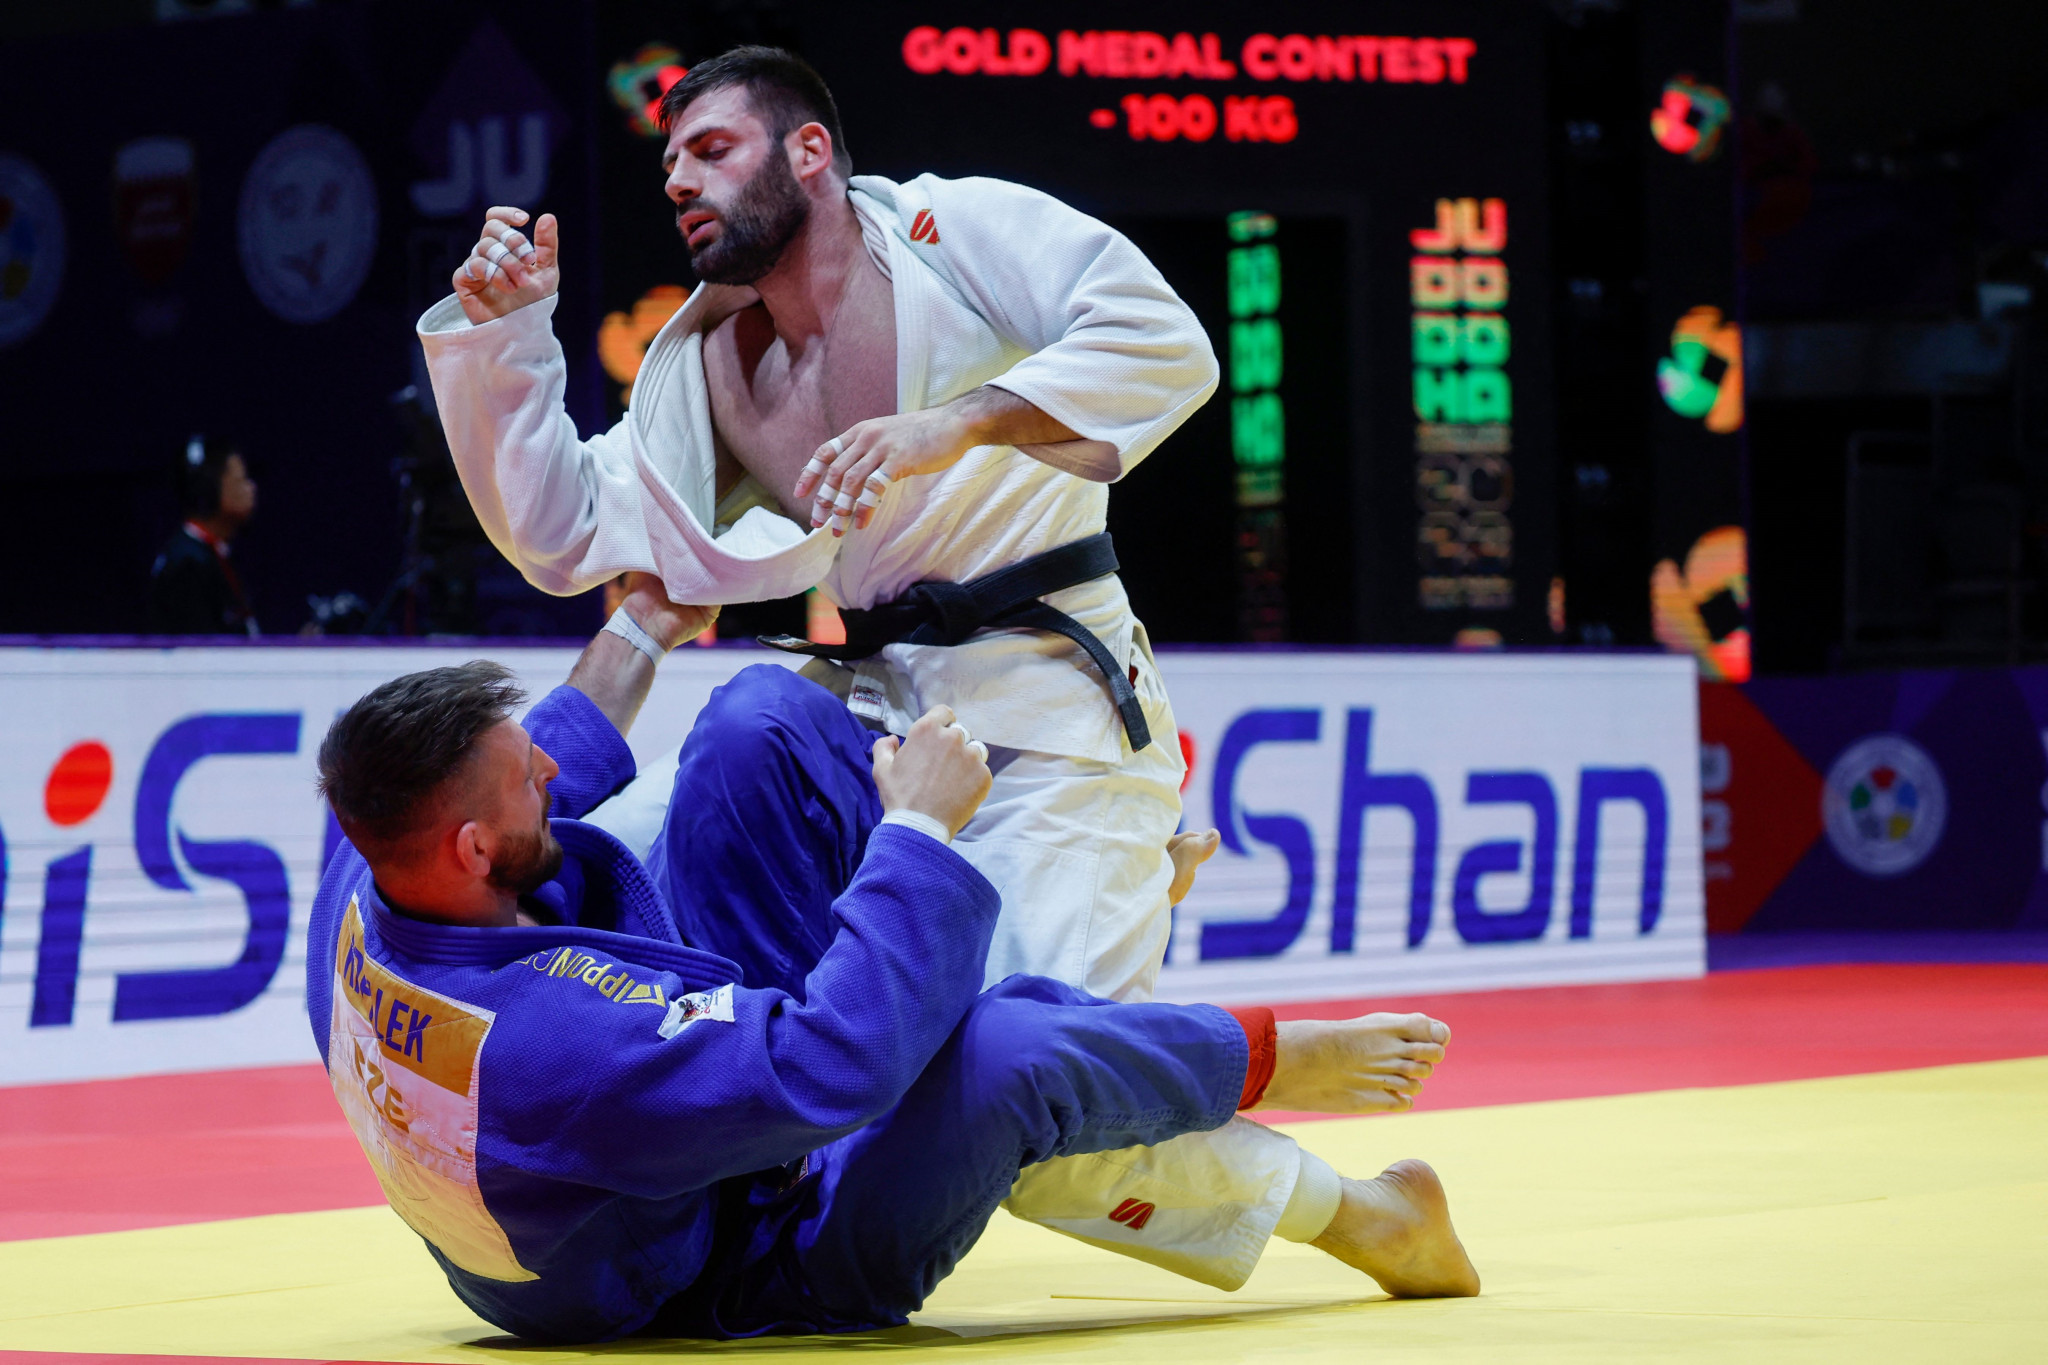 Judo is among the sports that have allowed Russians to return under a neutral banner but the decision led to Ukraine withdrawing from the recent World Championships in Doha ©Getty Images